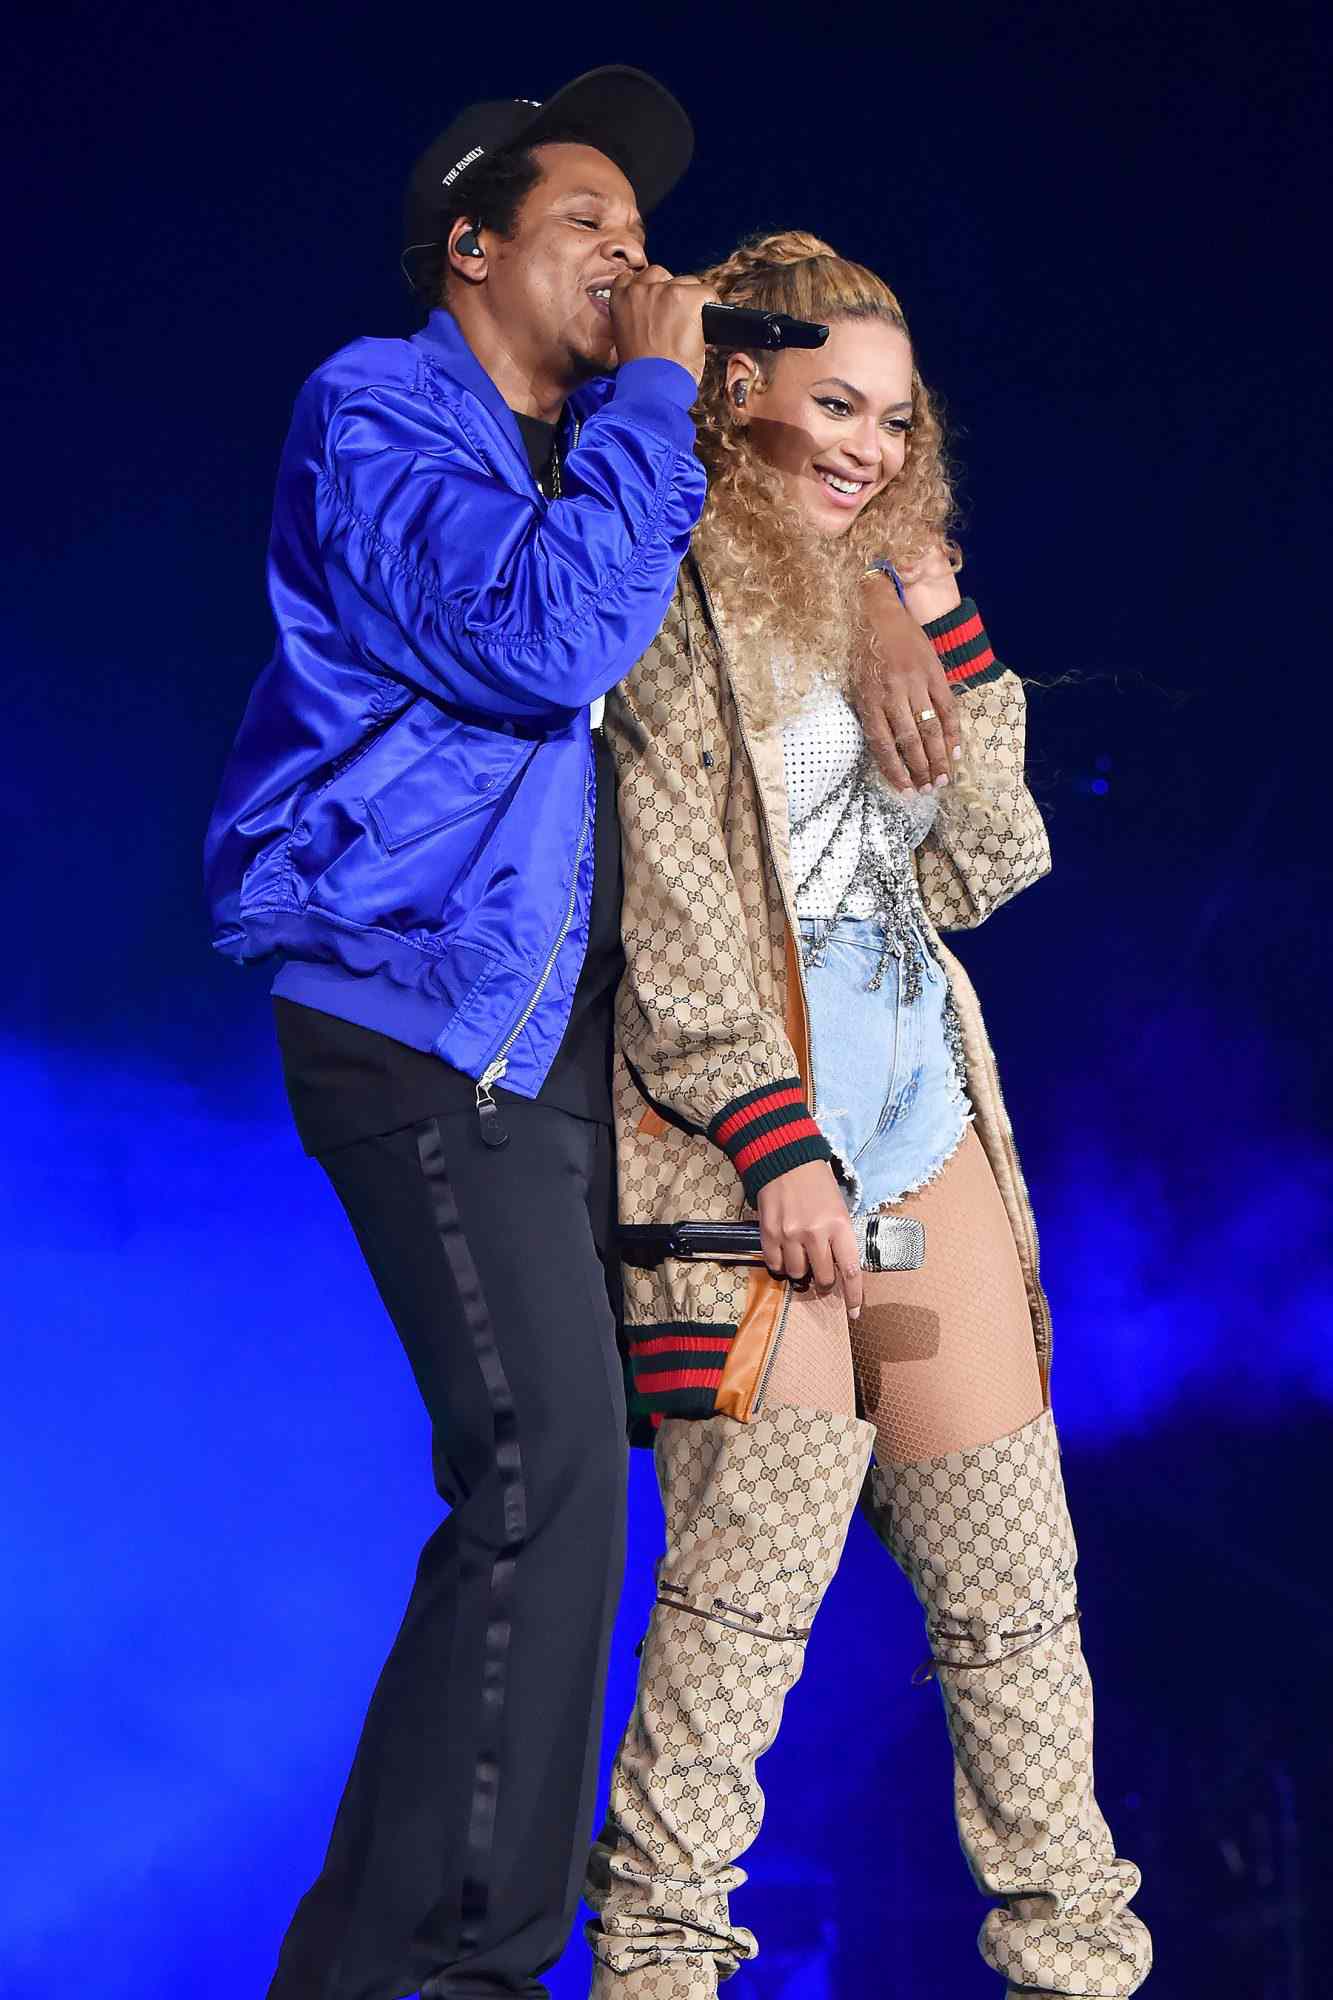 Beyonce and Jay-Z "On the Run II" Tour Opener - Cardiff